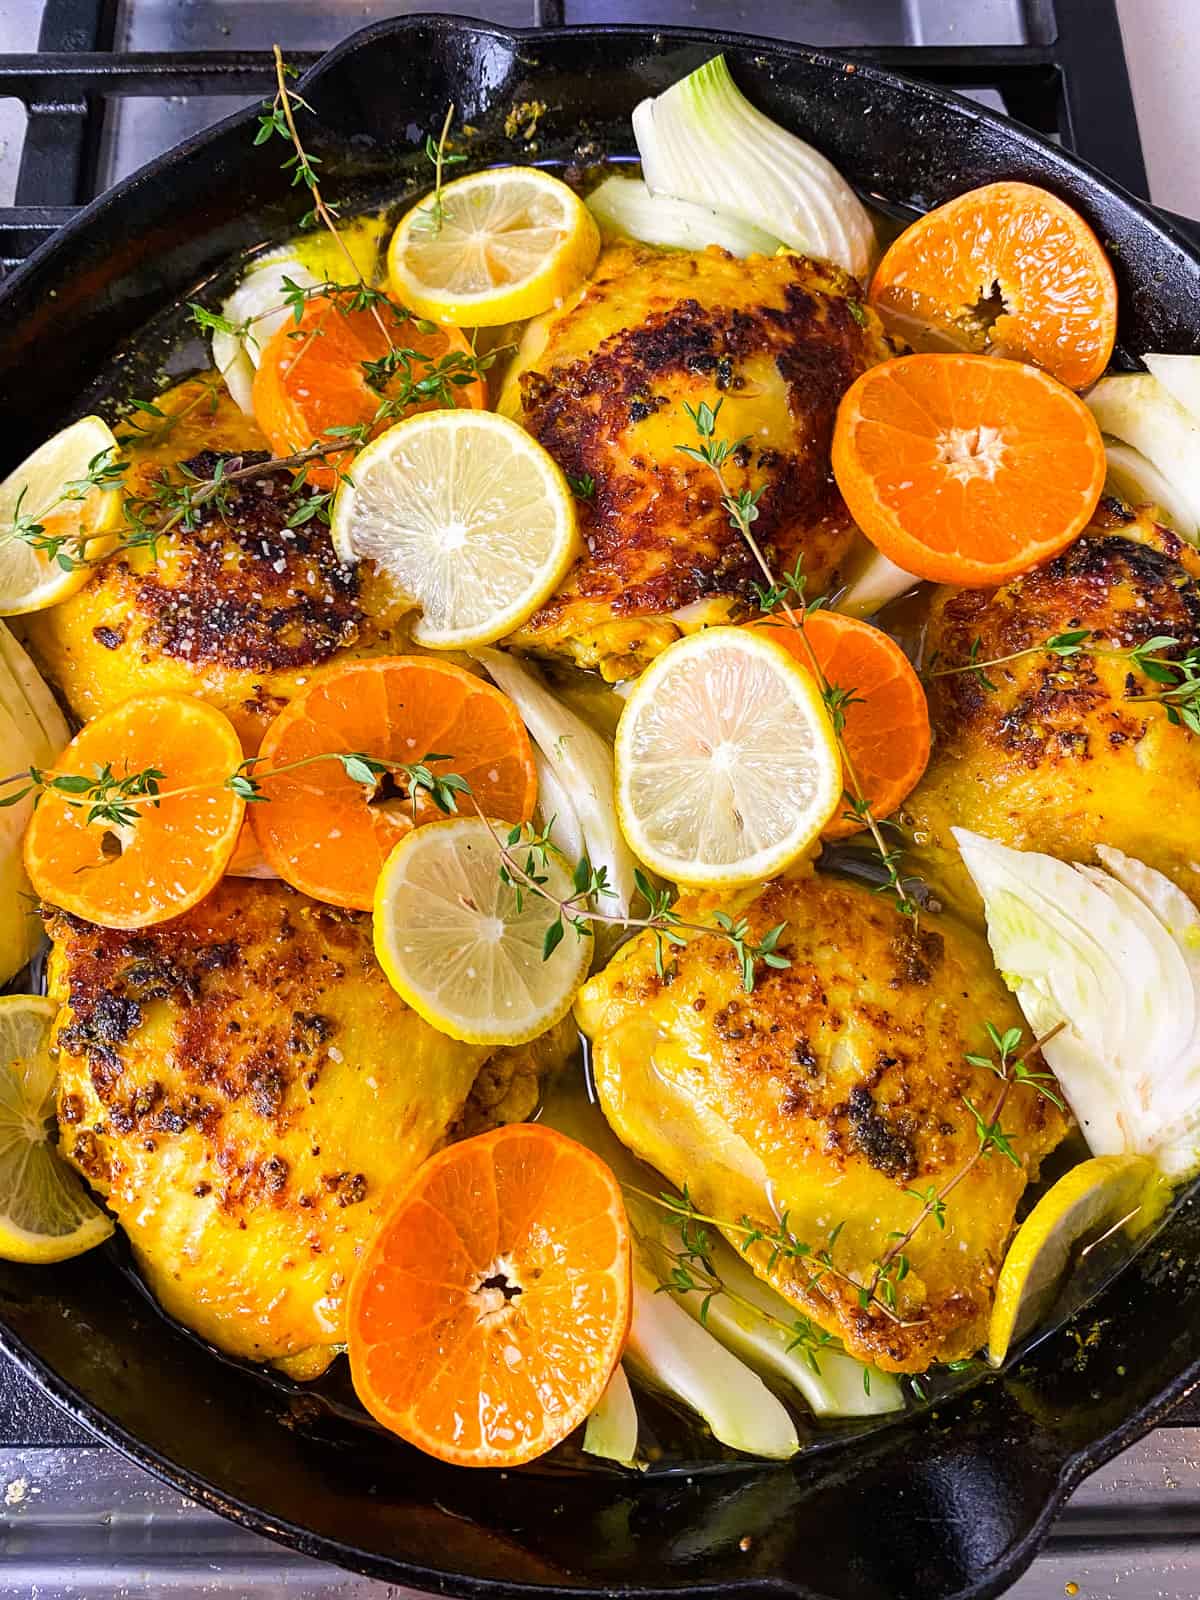 Add slices of citrus, fennel and fresh thyme to the turmeric chicken.